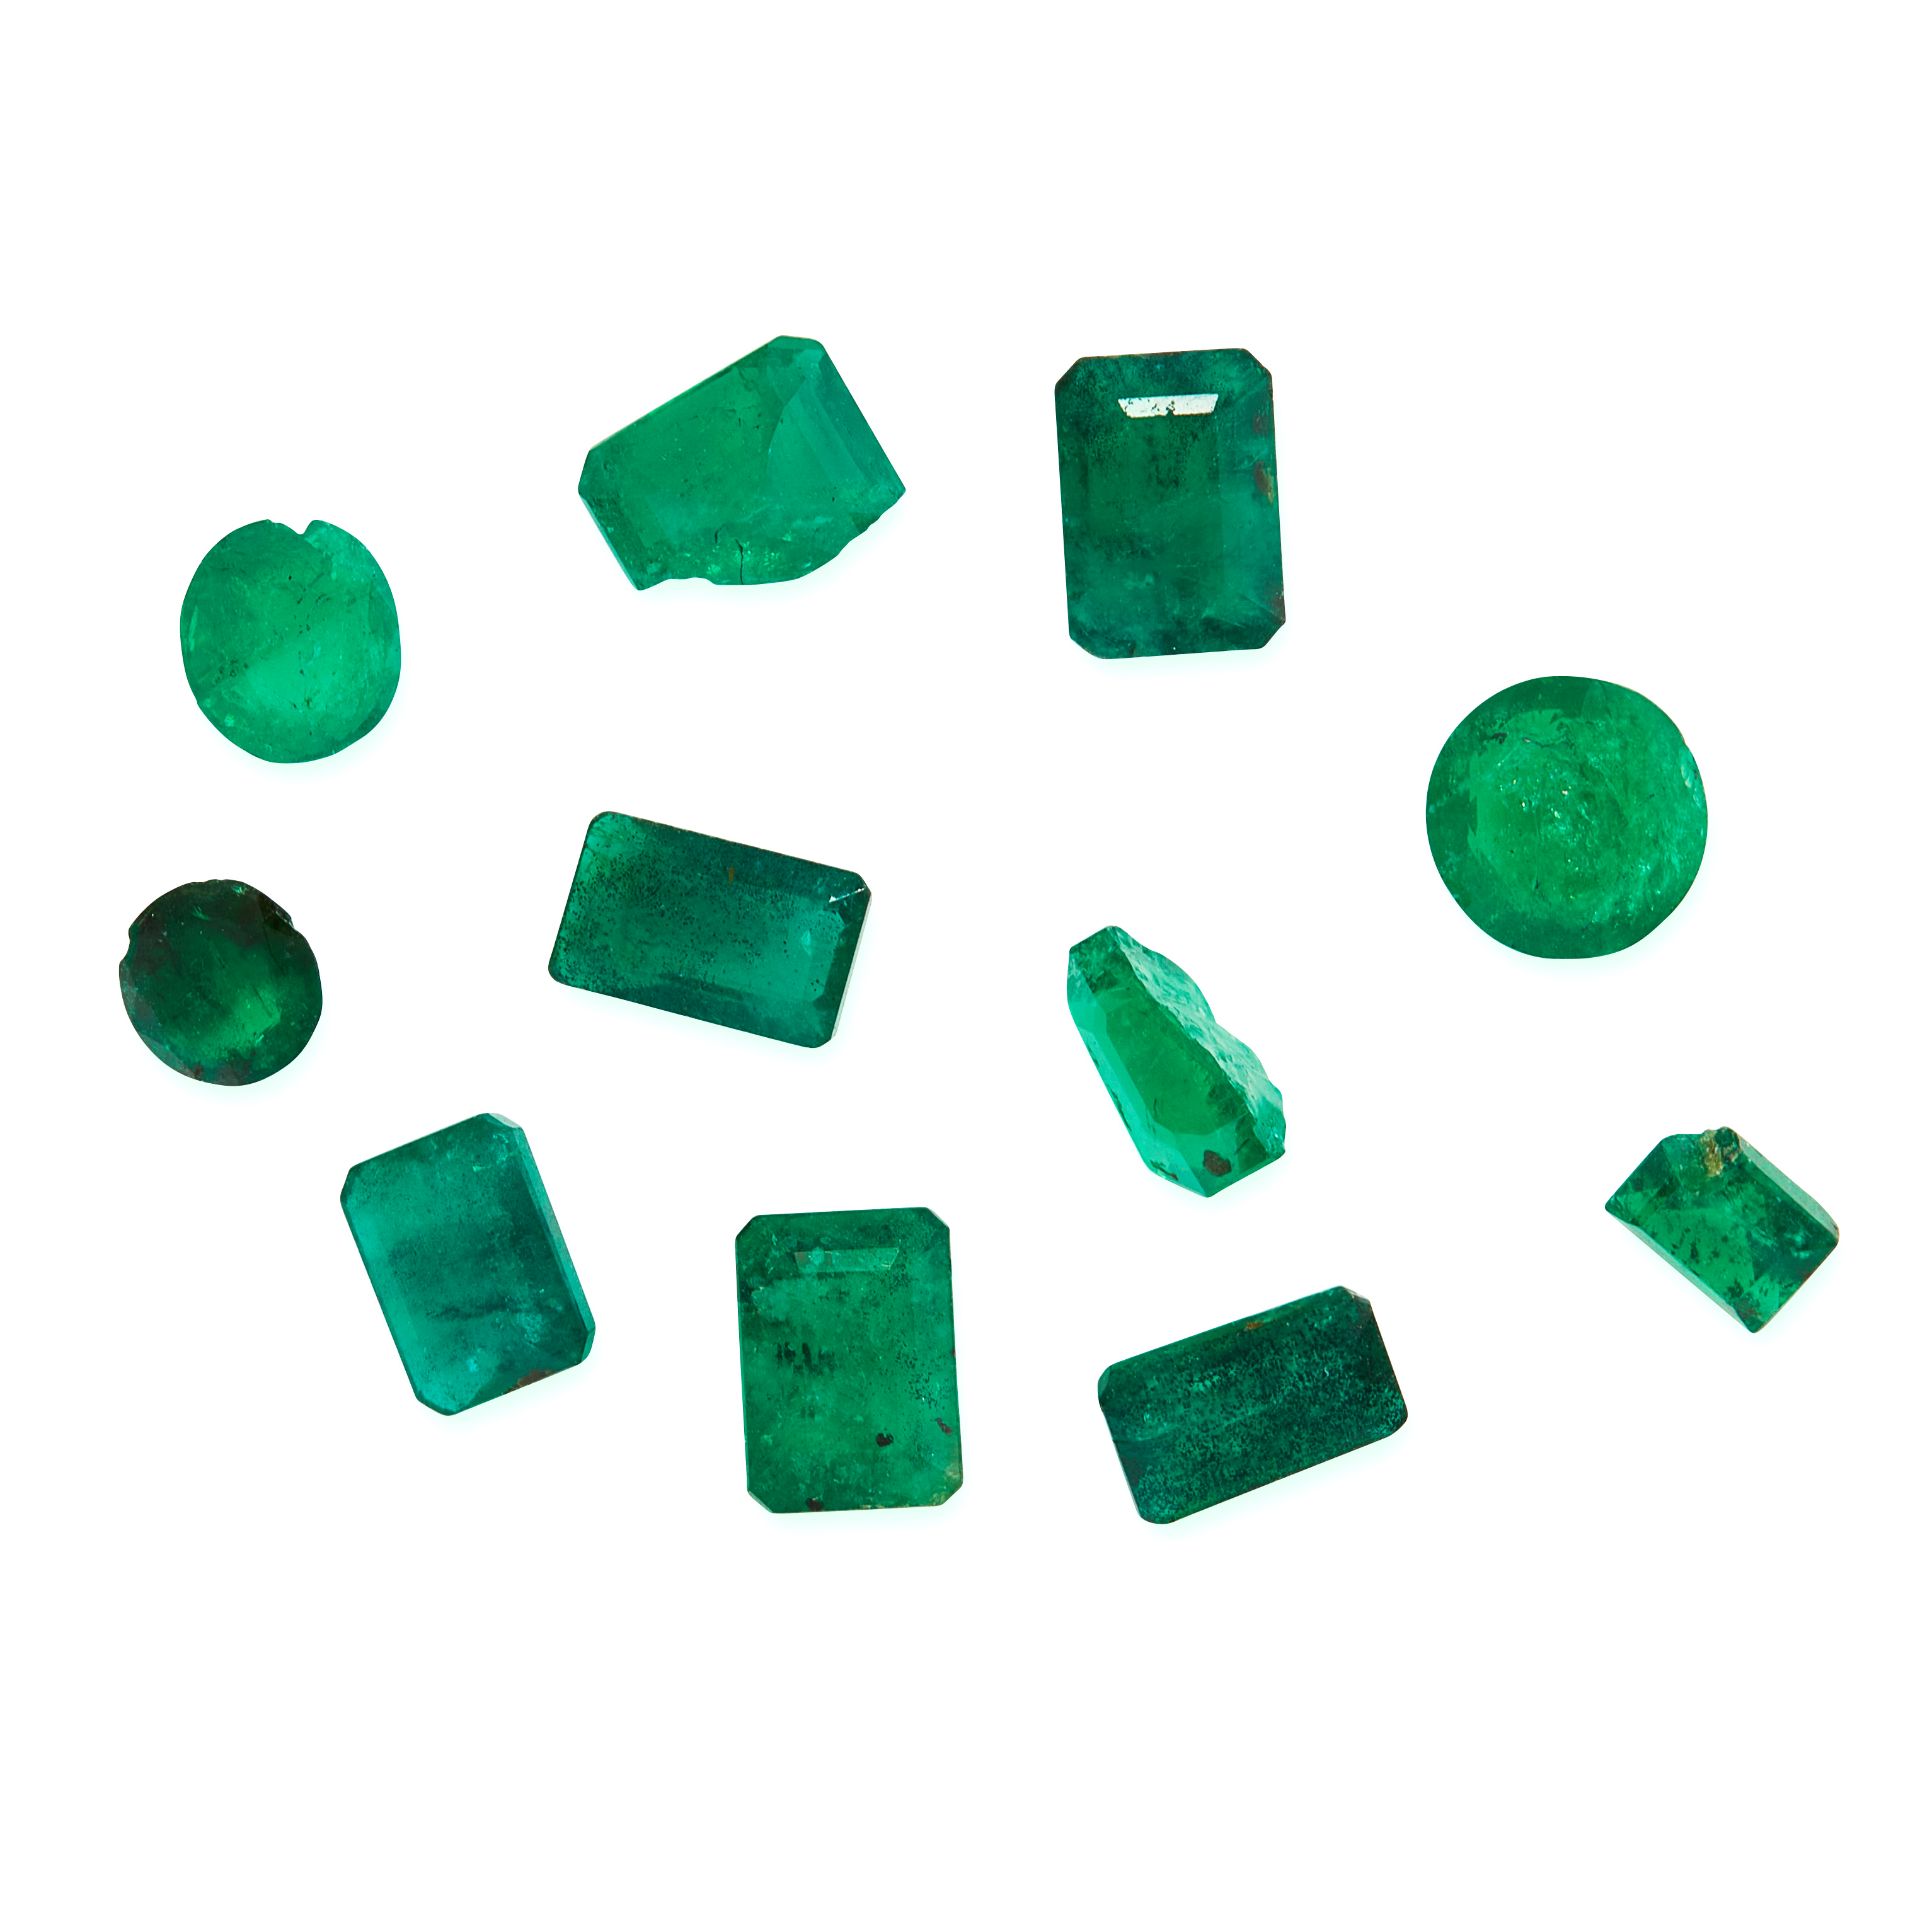 A MIXED LOT OF UNMOUNTED EMERALDS various cuts including emerald cut, round cut, all totalling 7.